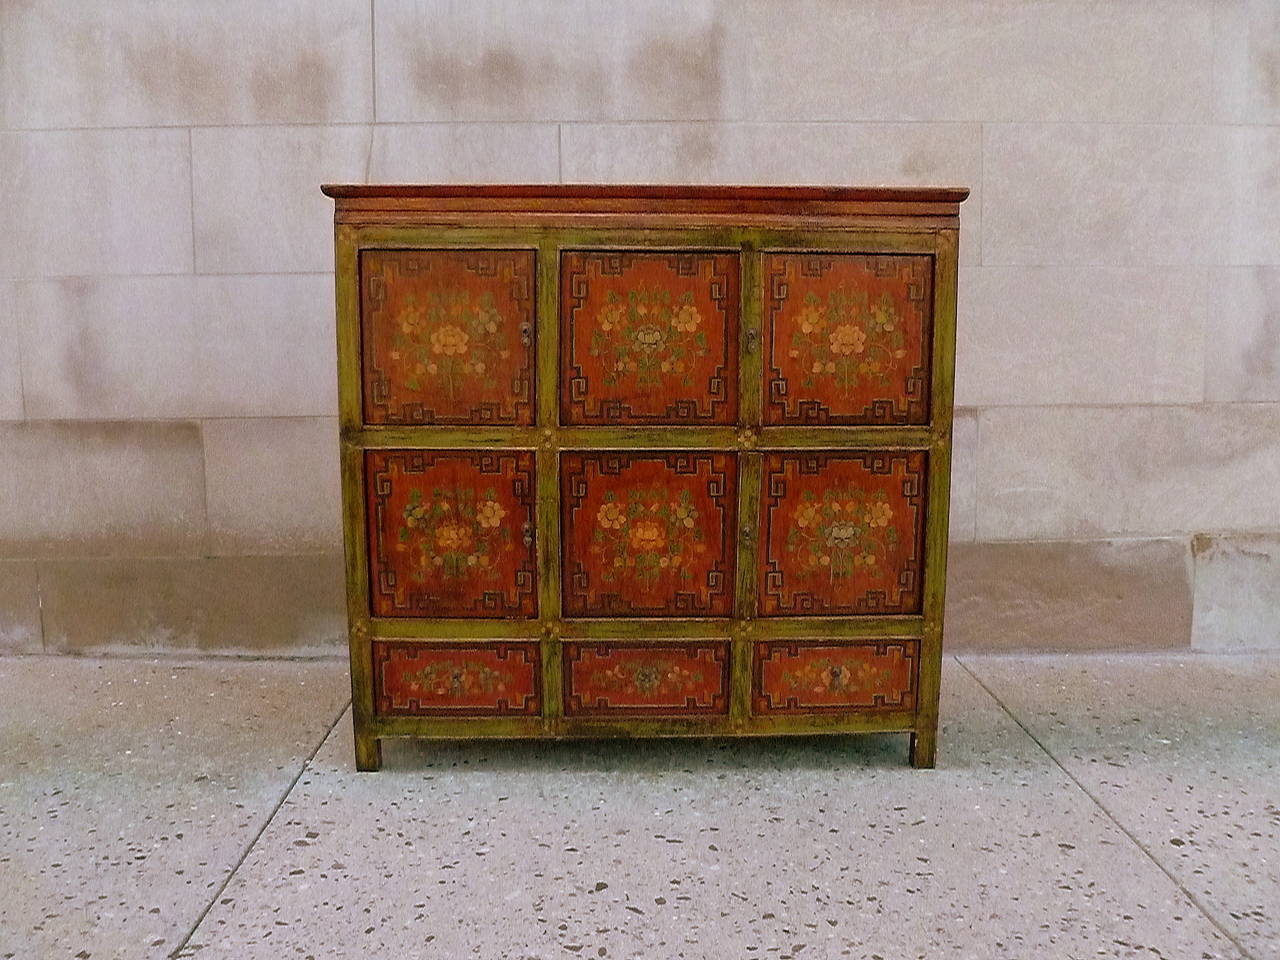 A beautiful Tibetan chest with hand-painted floral motif, two pairs of doors, simple form, elegant colors, 19th century.